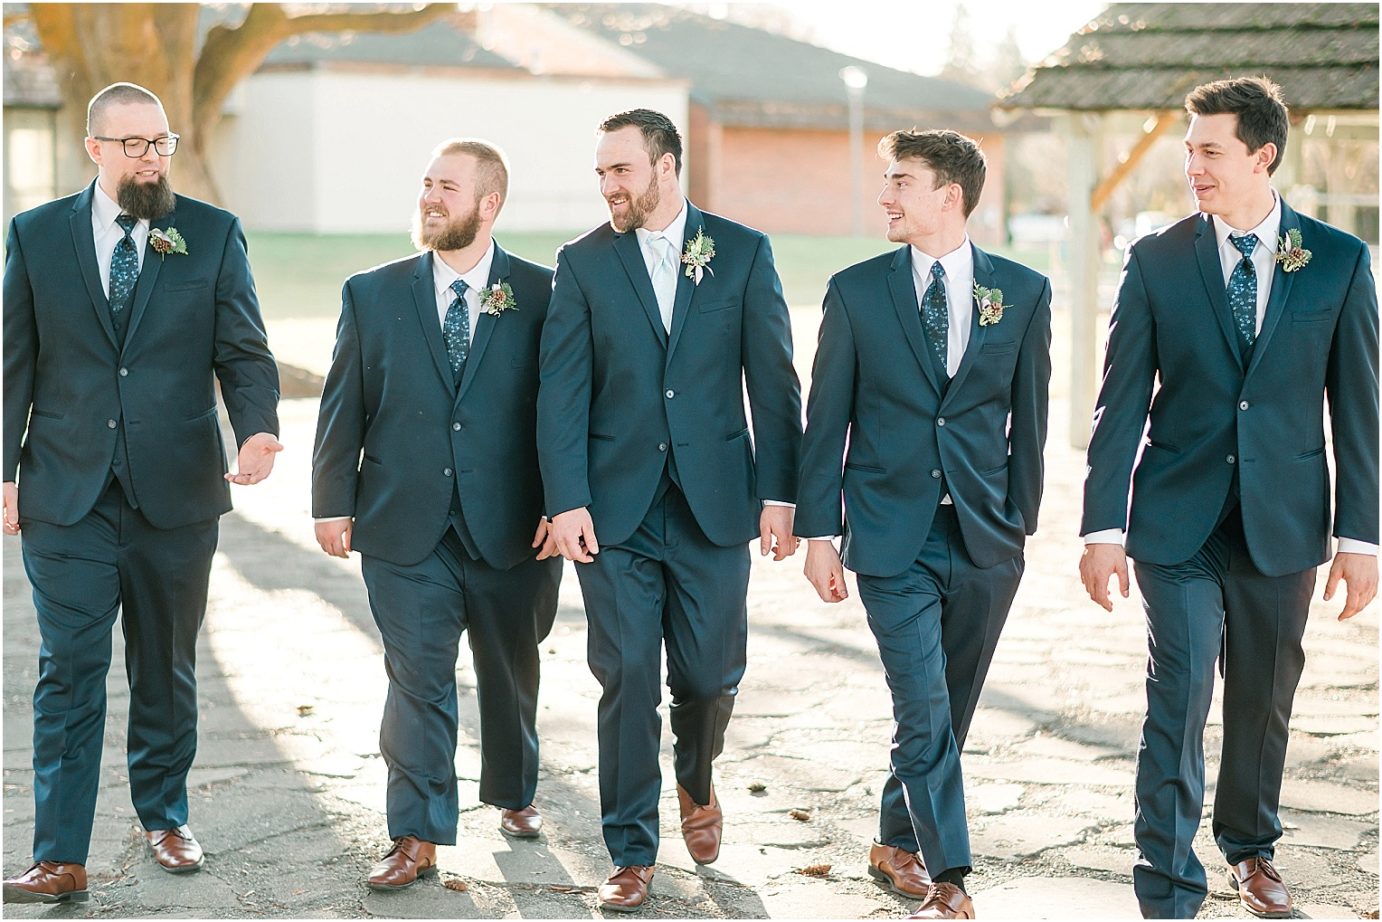 Wedding at The Armory Ellensburg Photographer Andrew and Stella groom and groomsmen